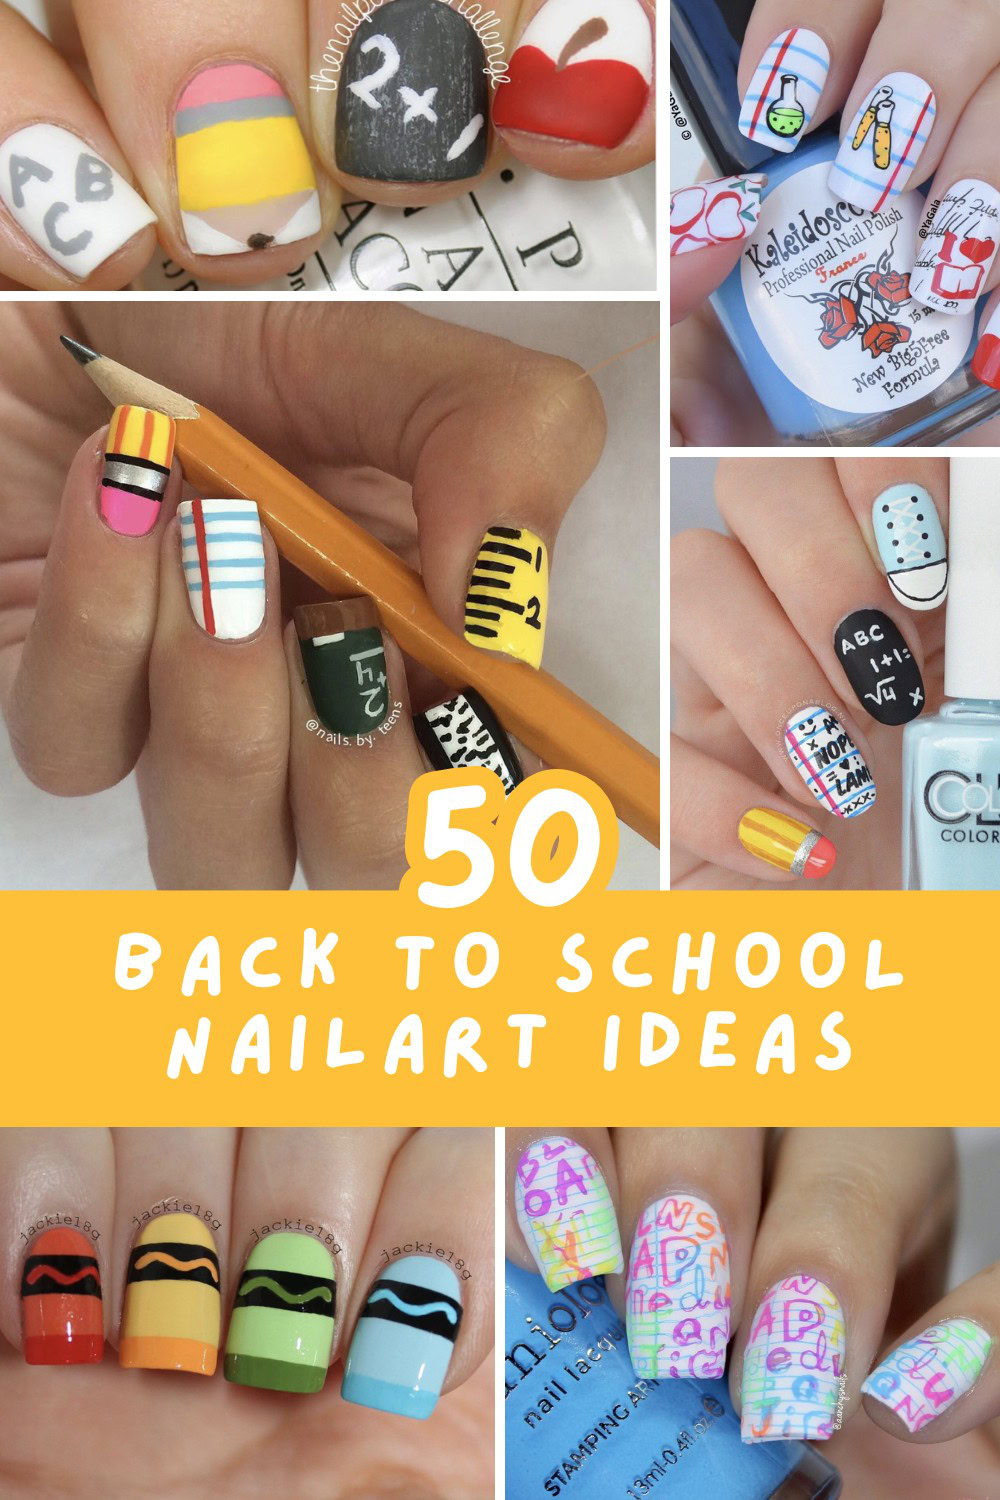 Nail your back to school look with these fabulous designs! From subtle to bold, these ideas are perfect for anyone looking to make a statement. 🌟💅 #SchoolStyle #NailGoals